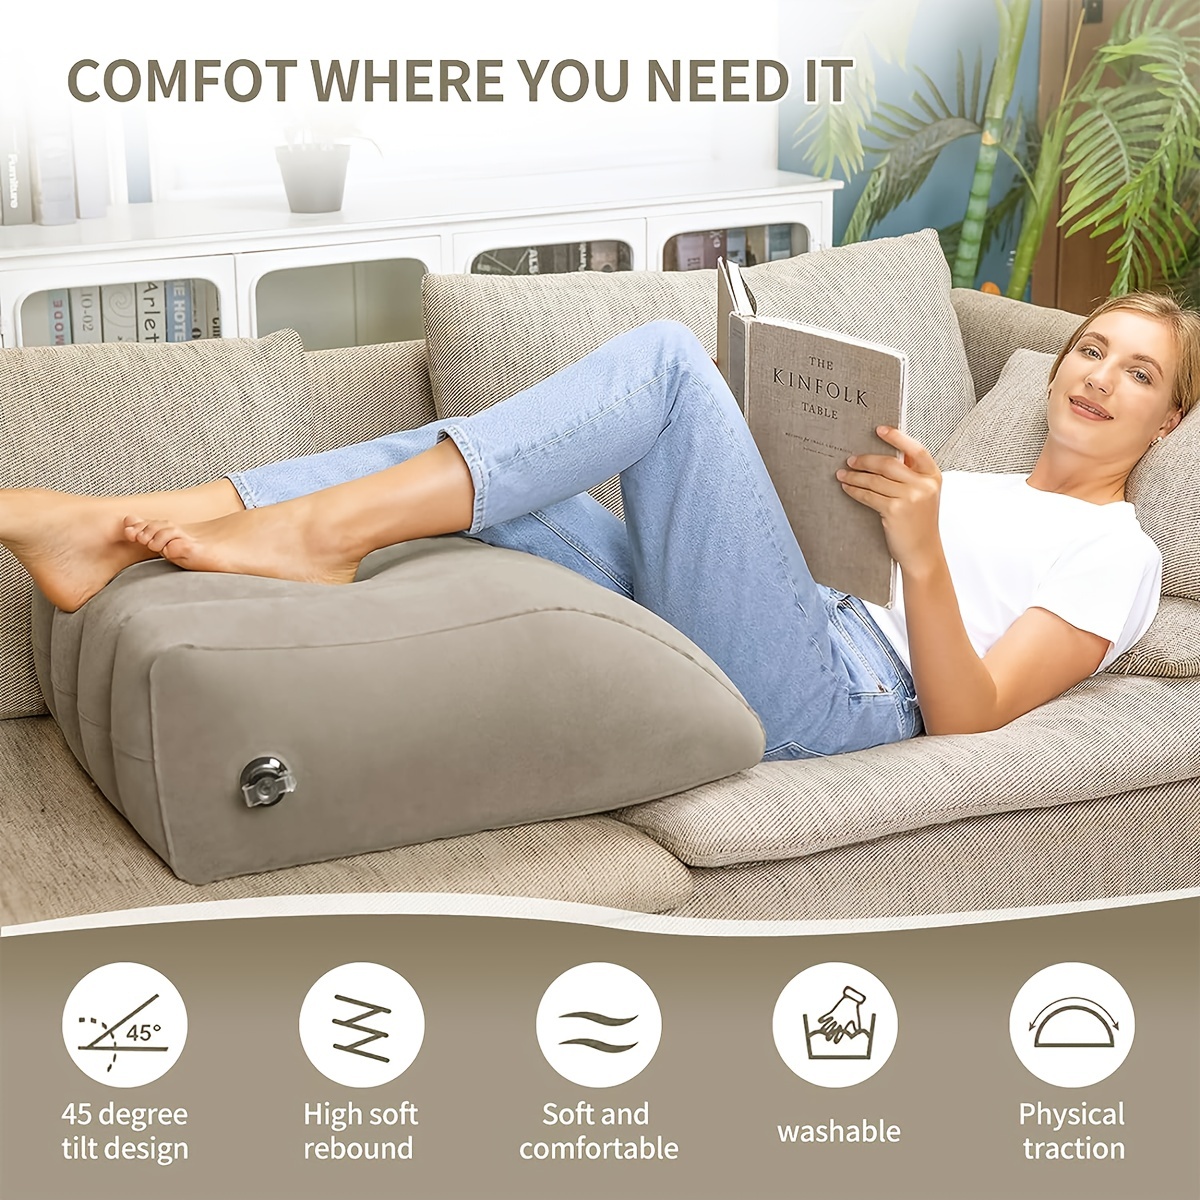 Leg Elevation Wedge Pillow Knee Foam For Sleeping Post Surgery Foot Leg  Rest Pillows Knee Support Cushion Medical Elevated Pillow Leg Elevator Bed